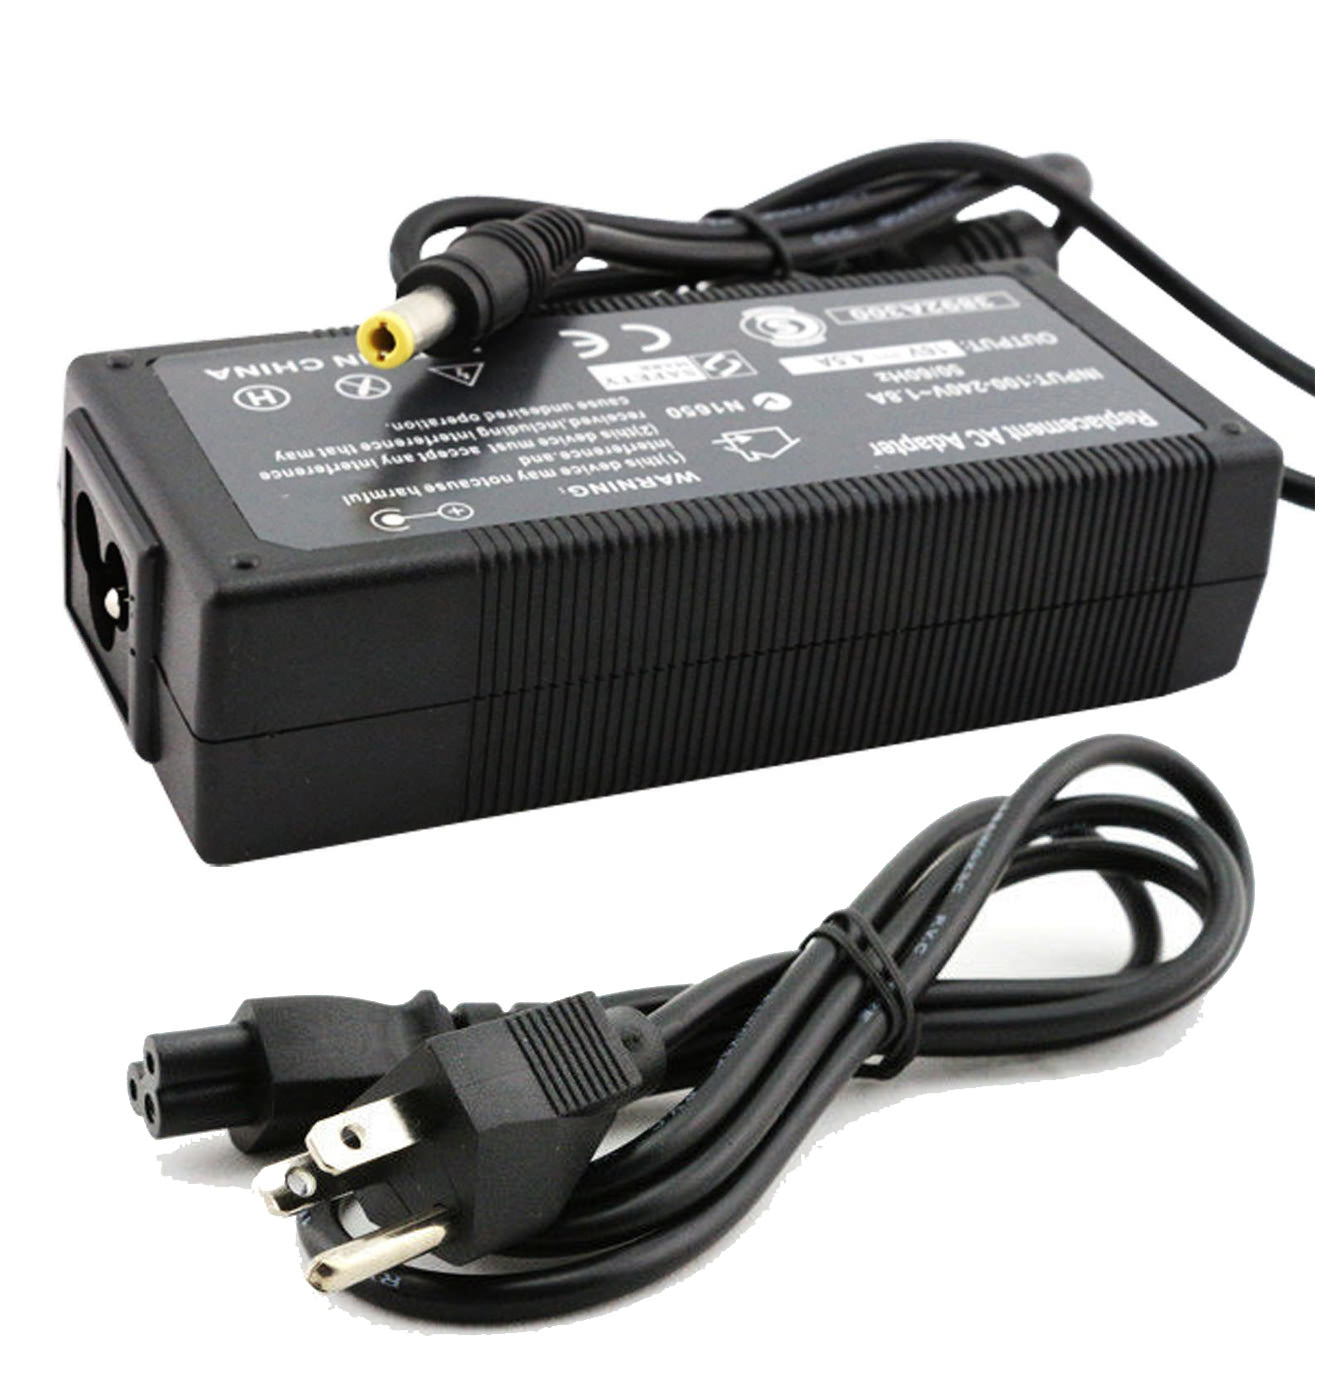 AC Adapter Charger for IBM ThinkPad R51 Notebook.